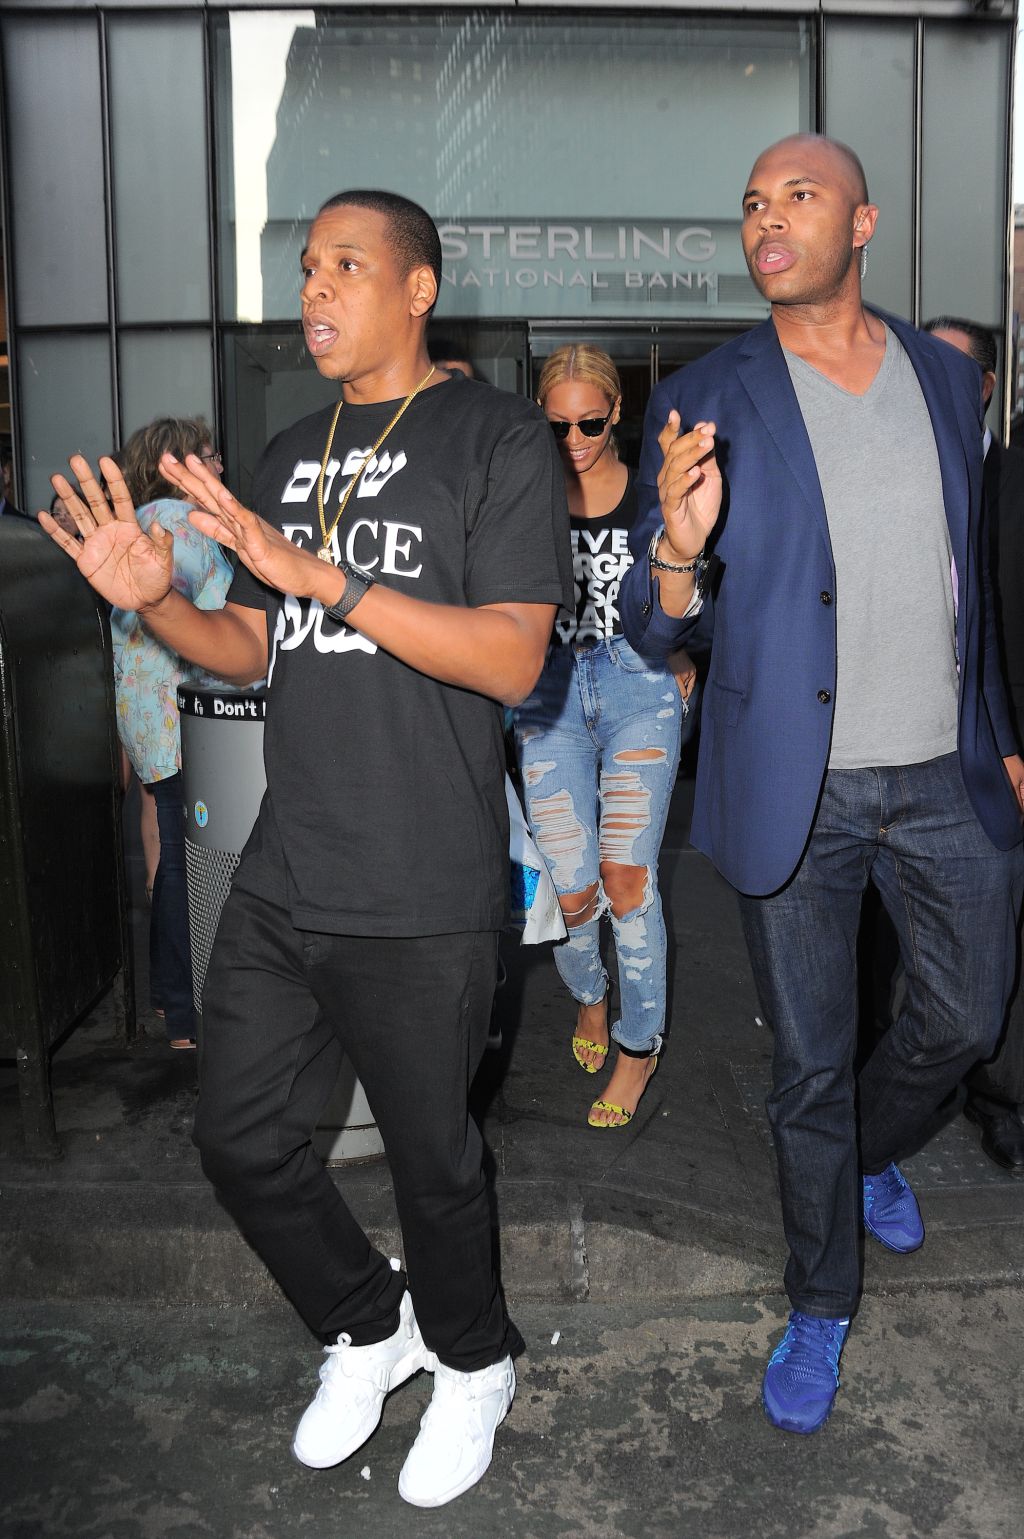 Jay Z steps up to defend his bodyguard after he was hit by a paparazzi outside of NYC offices